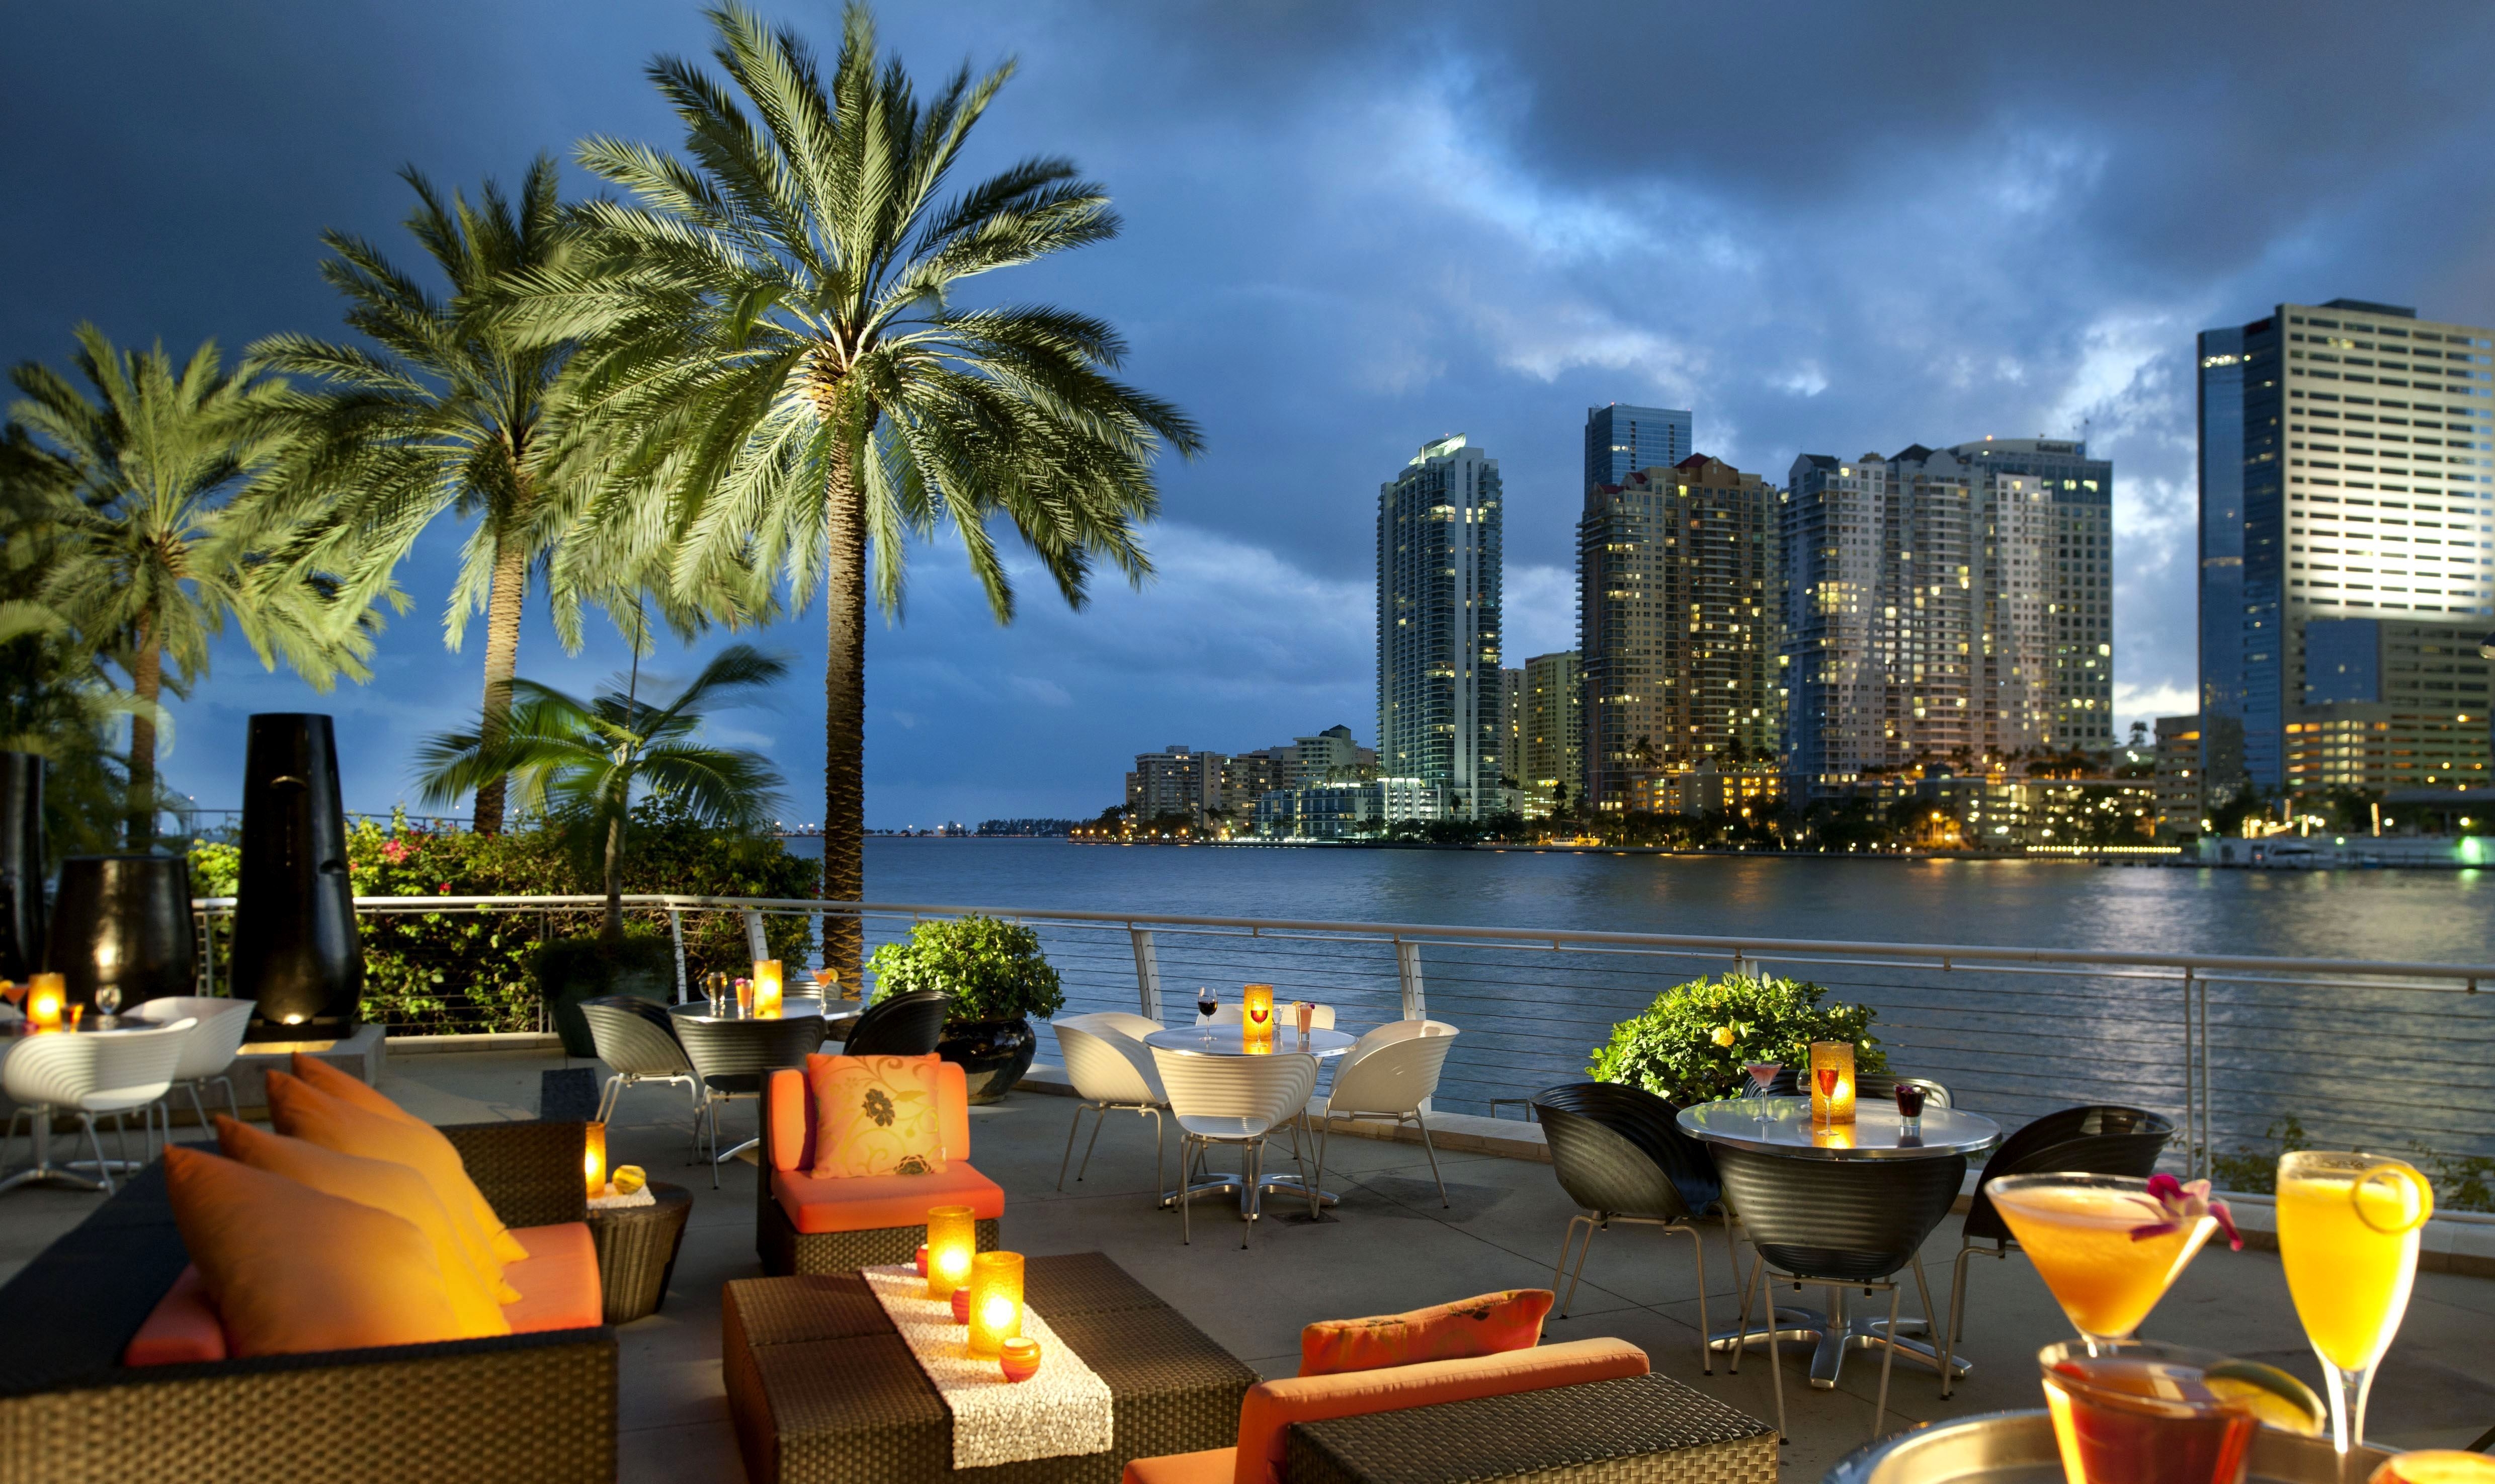 cities, miami, cafe, palms, usa, city, ocean, united states, bay, tables, café, florida, coffee tables download HD wallpaper